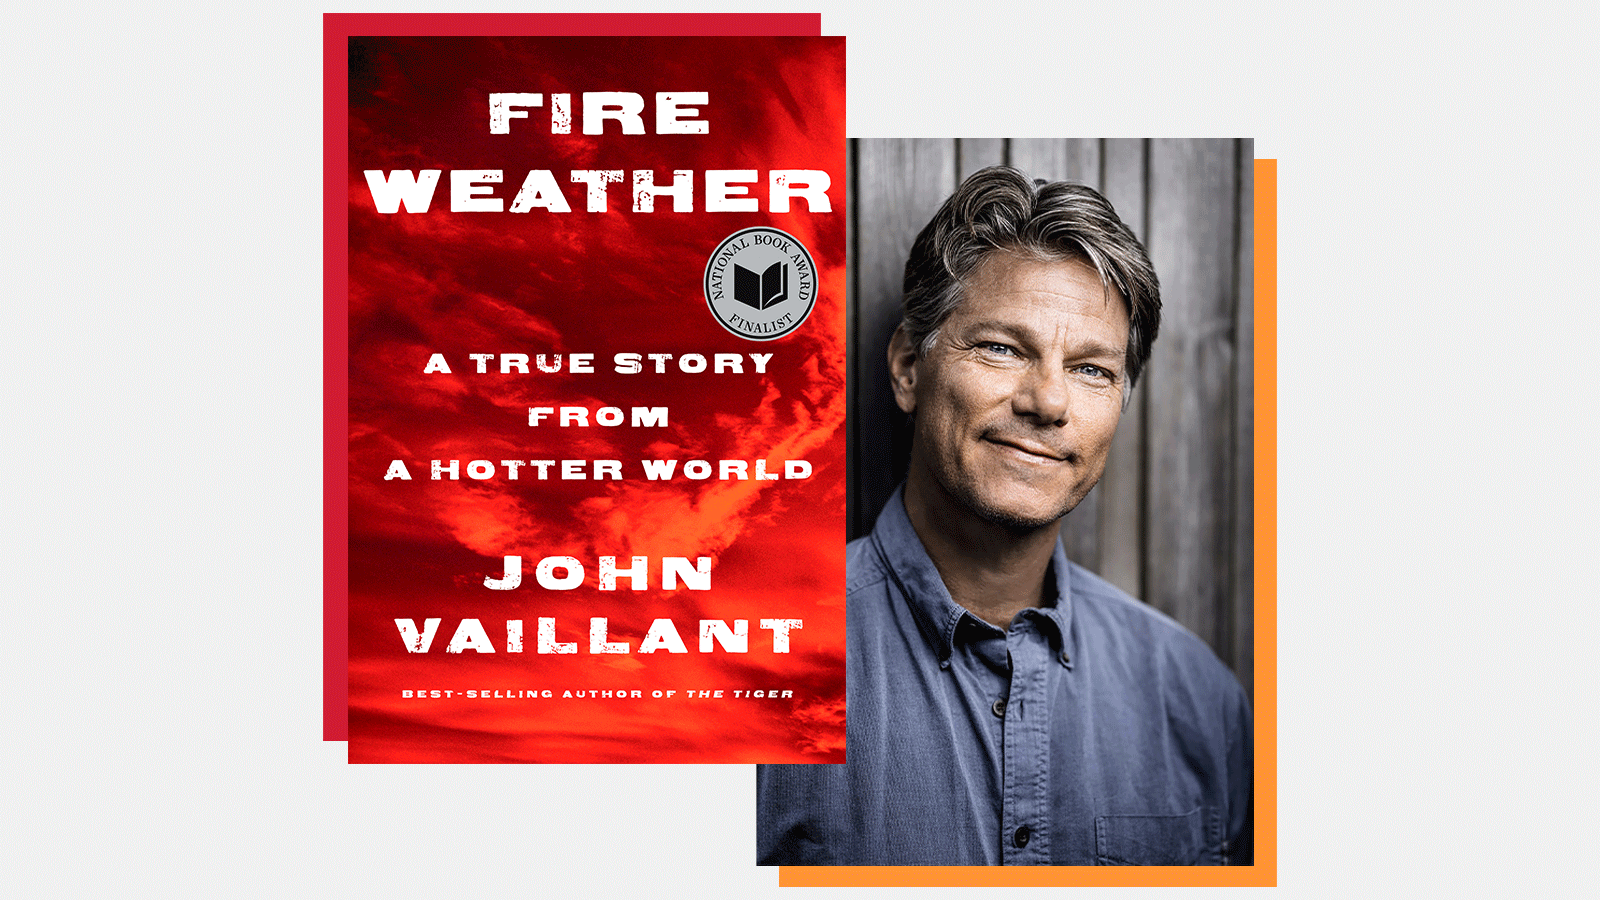 Fire Weather book cover and author John Valliant headshot